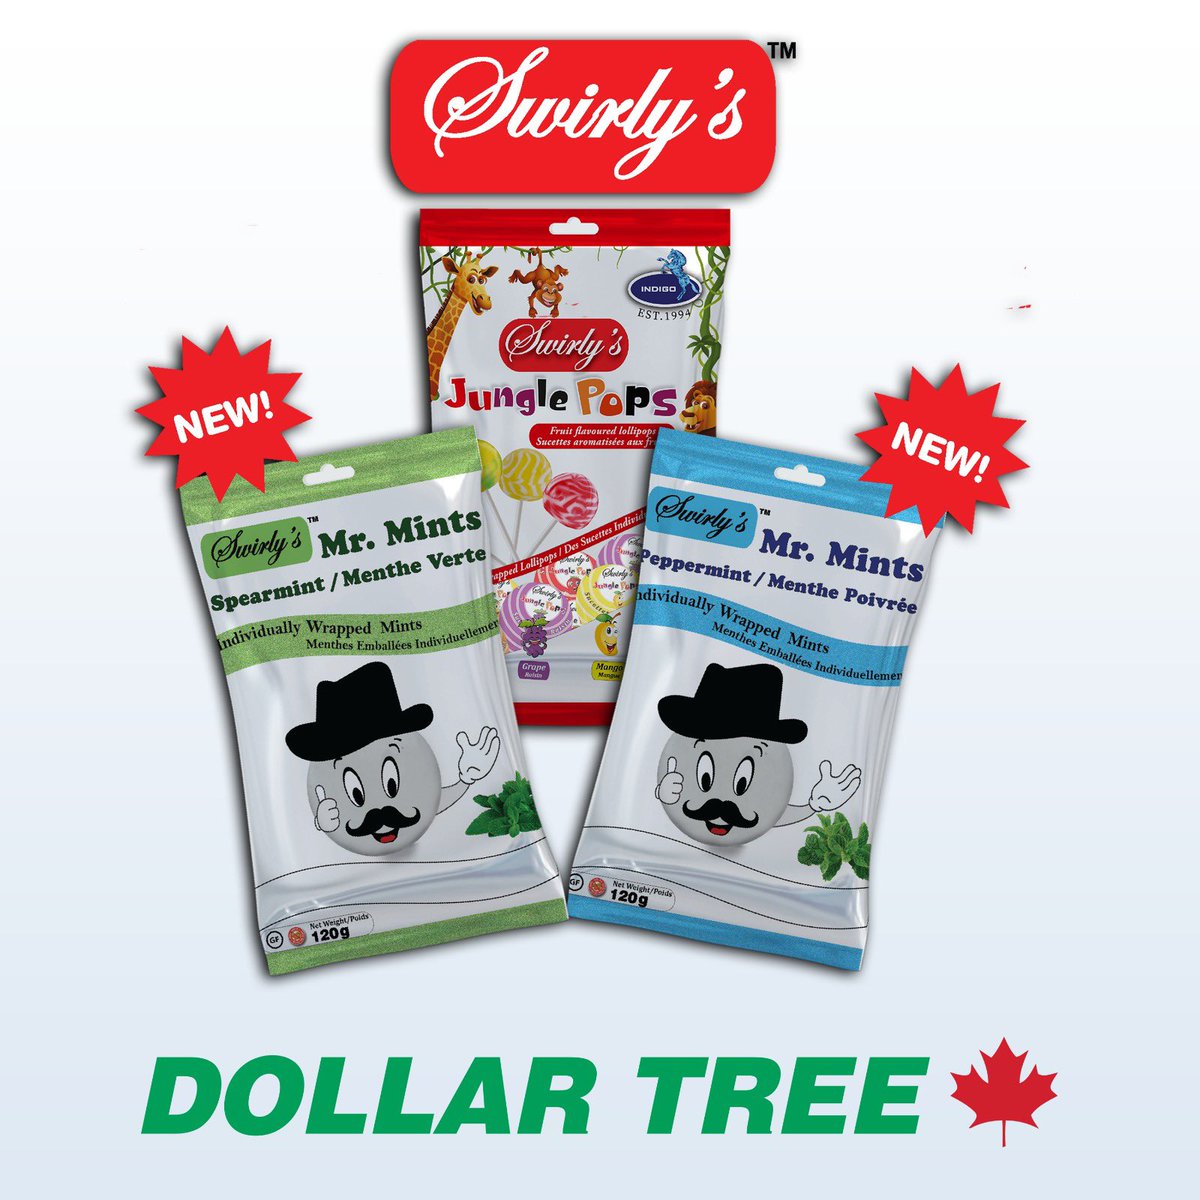 You asked and we delivered! Swirly's Mints and Lollipops available now across Canada at all the Dollar Tree locations! High quality candy at affordable prices!!

#candy #mints #dollartree #dollar